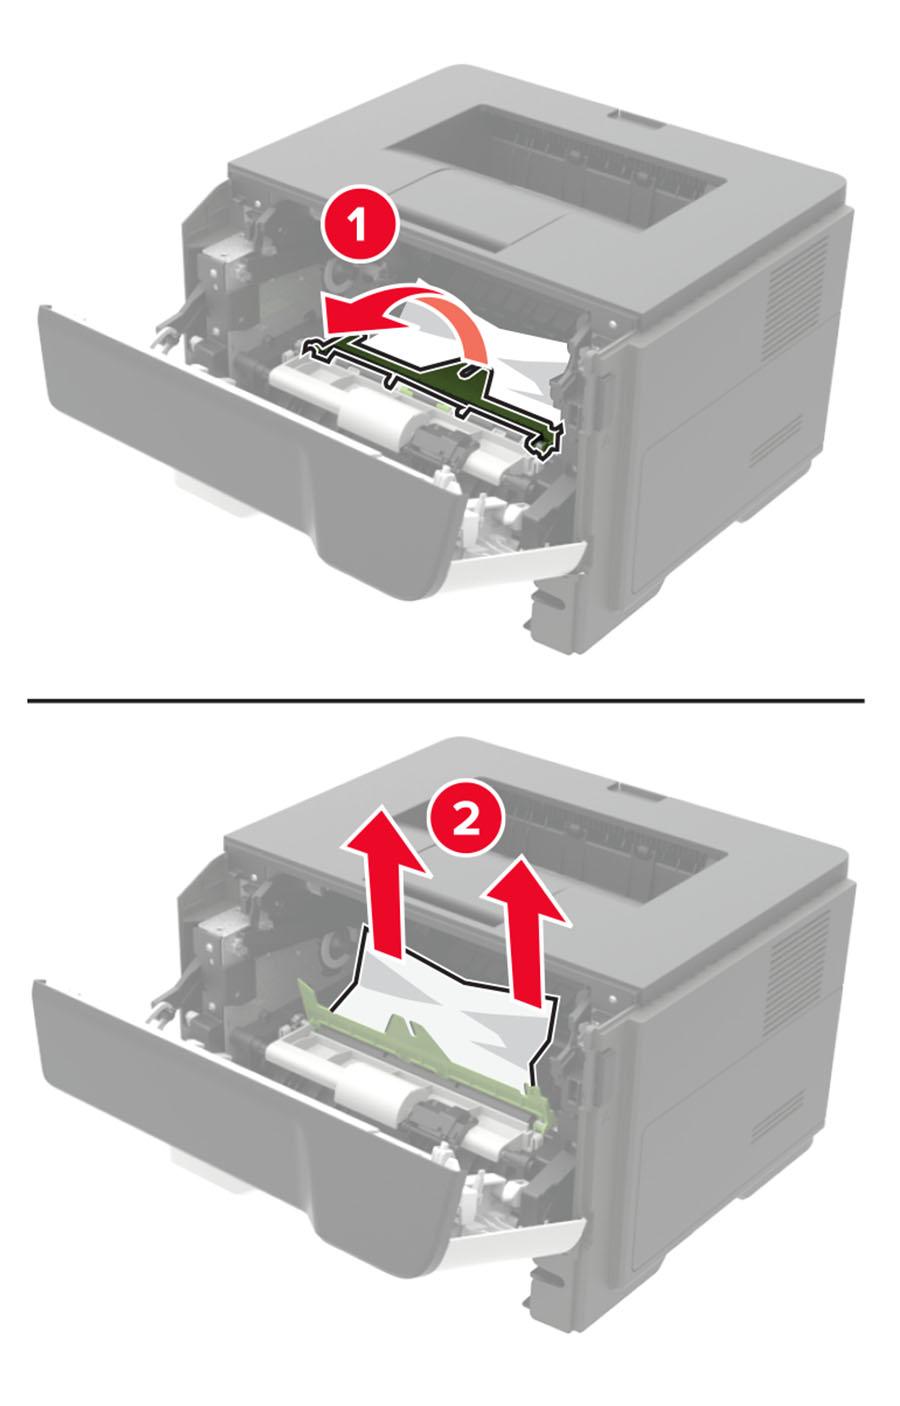 7 Insert the toner cartridge. 5 Remove the jammed paper. CAUTION HOT SURFACE: The inside of the printer might be hot.